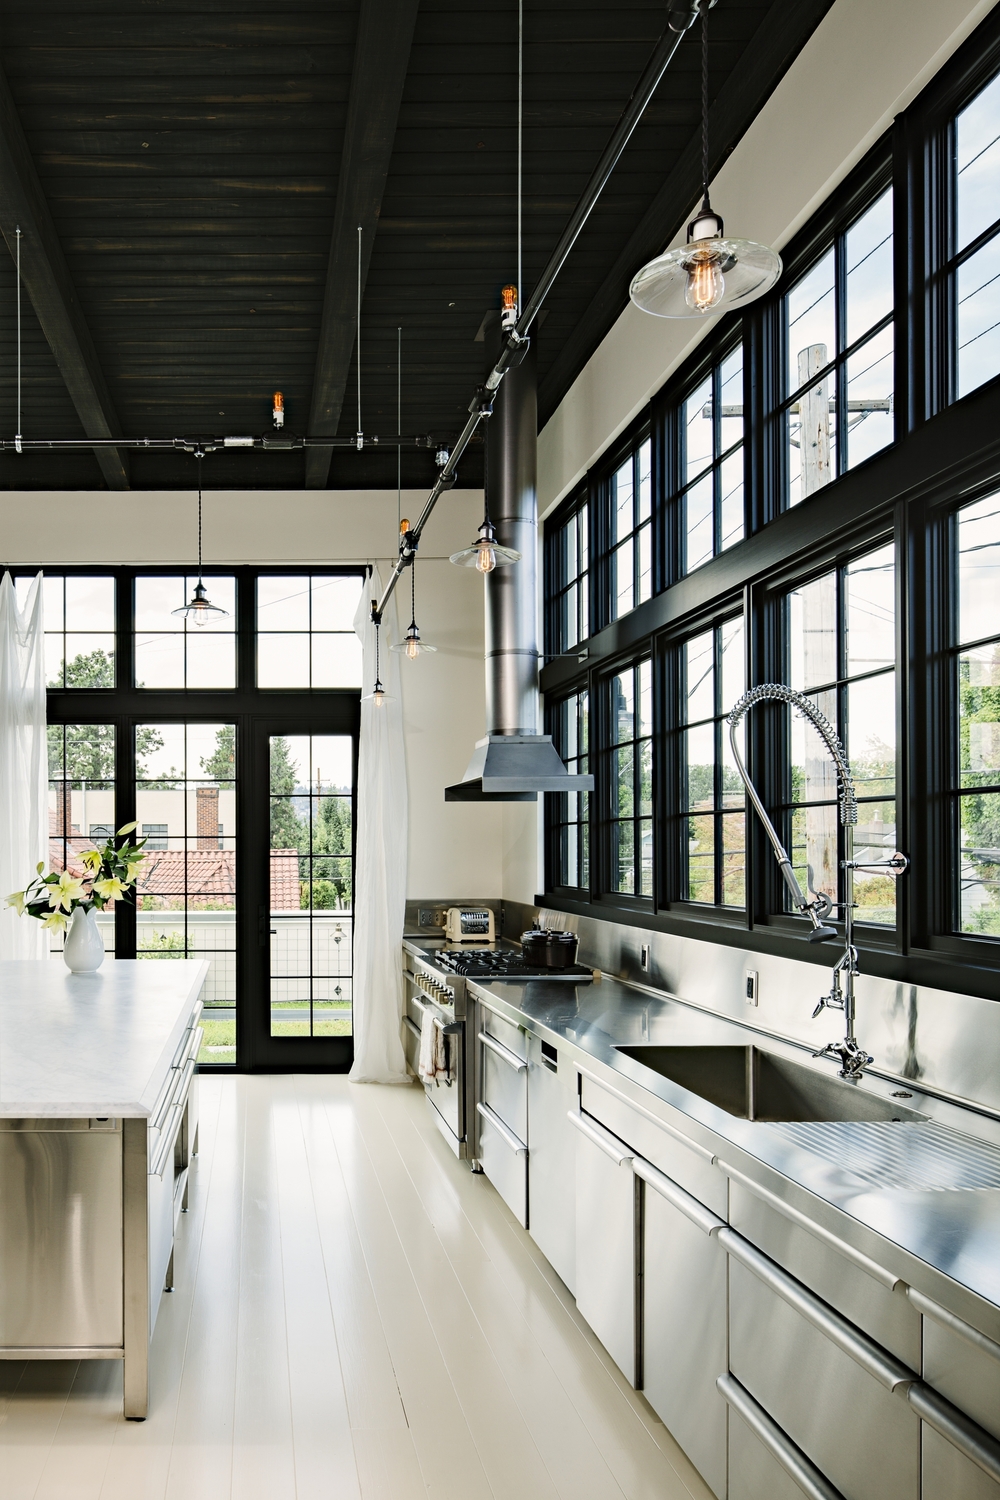 Lighting ideas for your vintage industrial kitchen